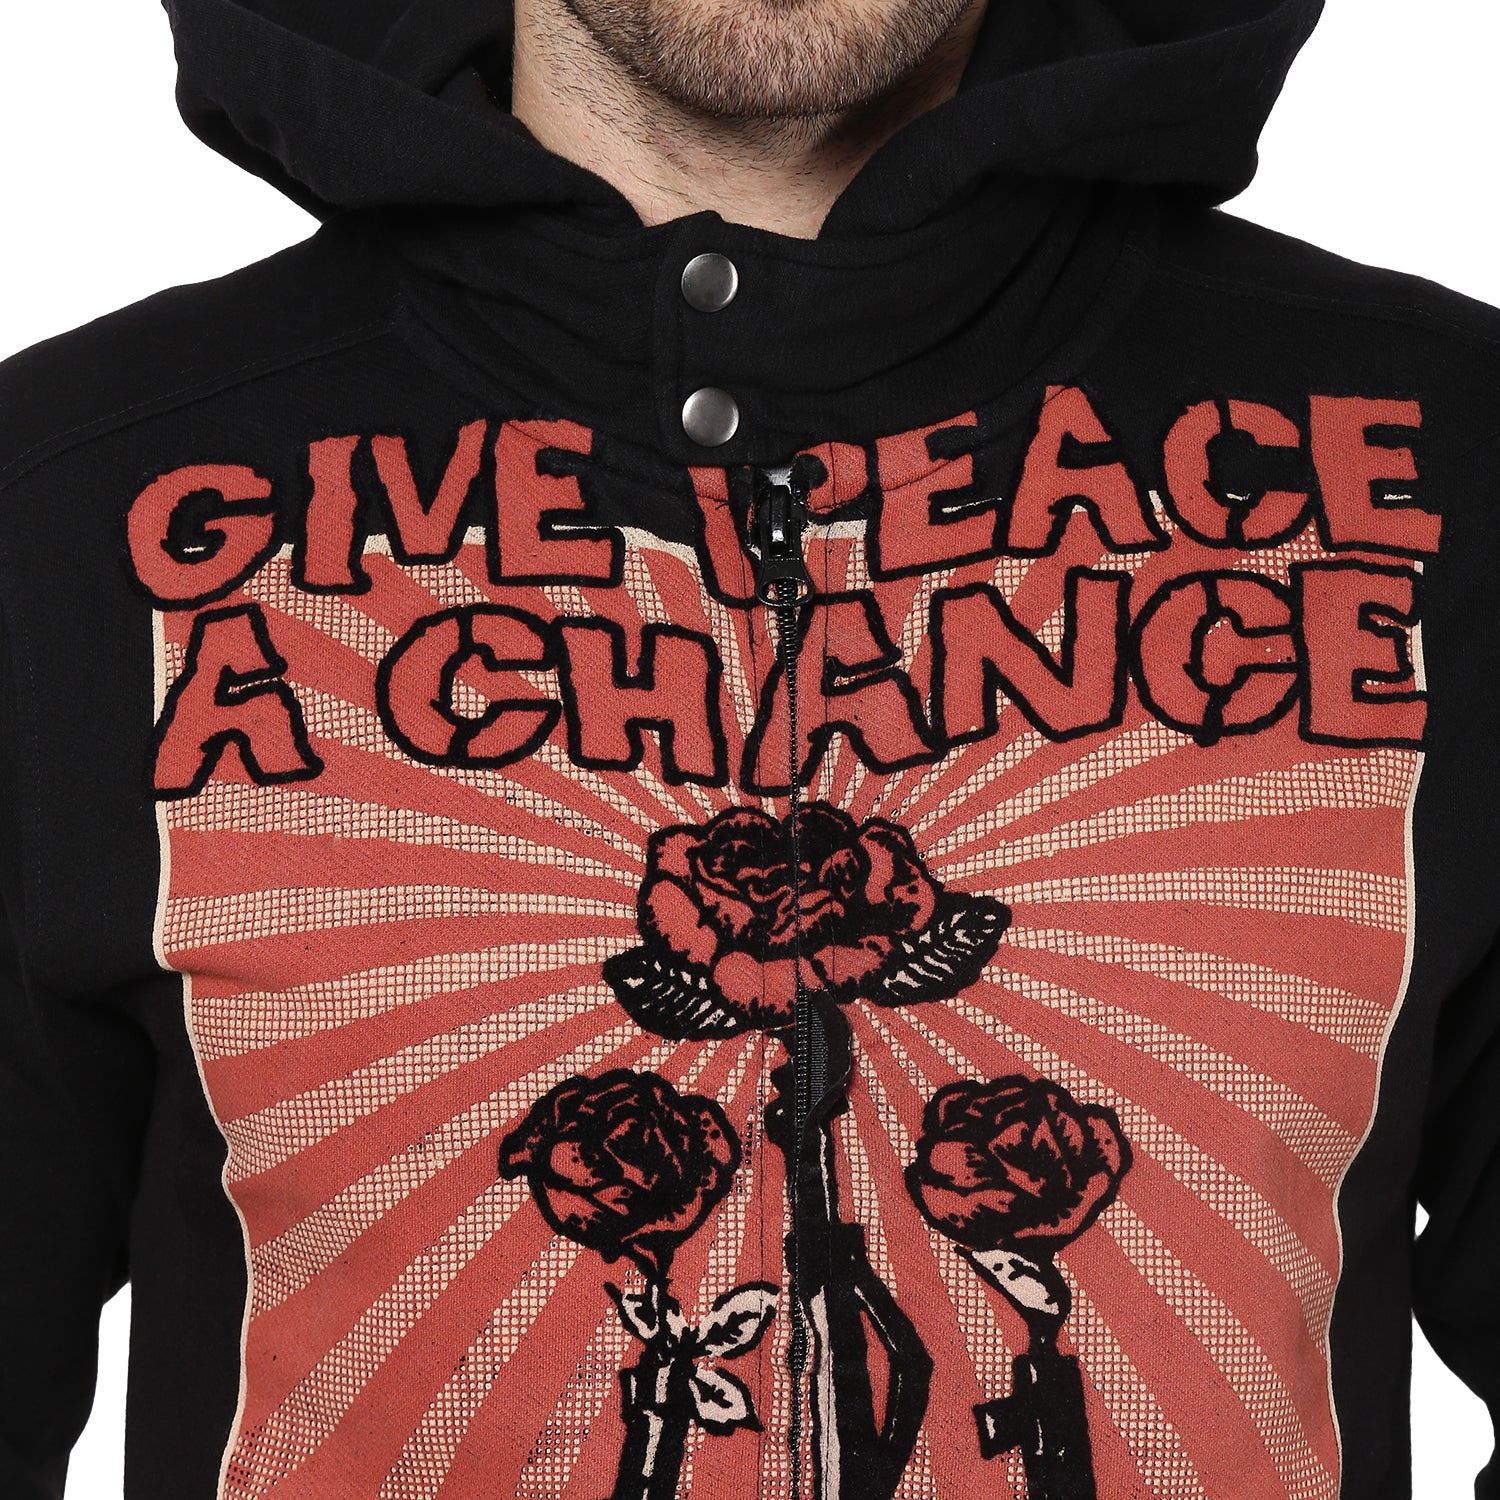 GIVE-PEACE-ANCE